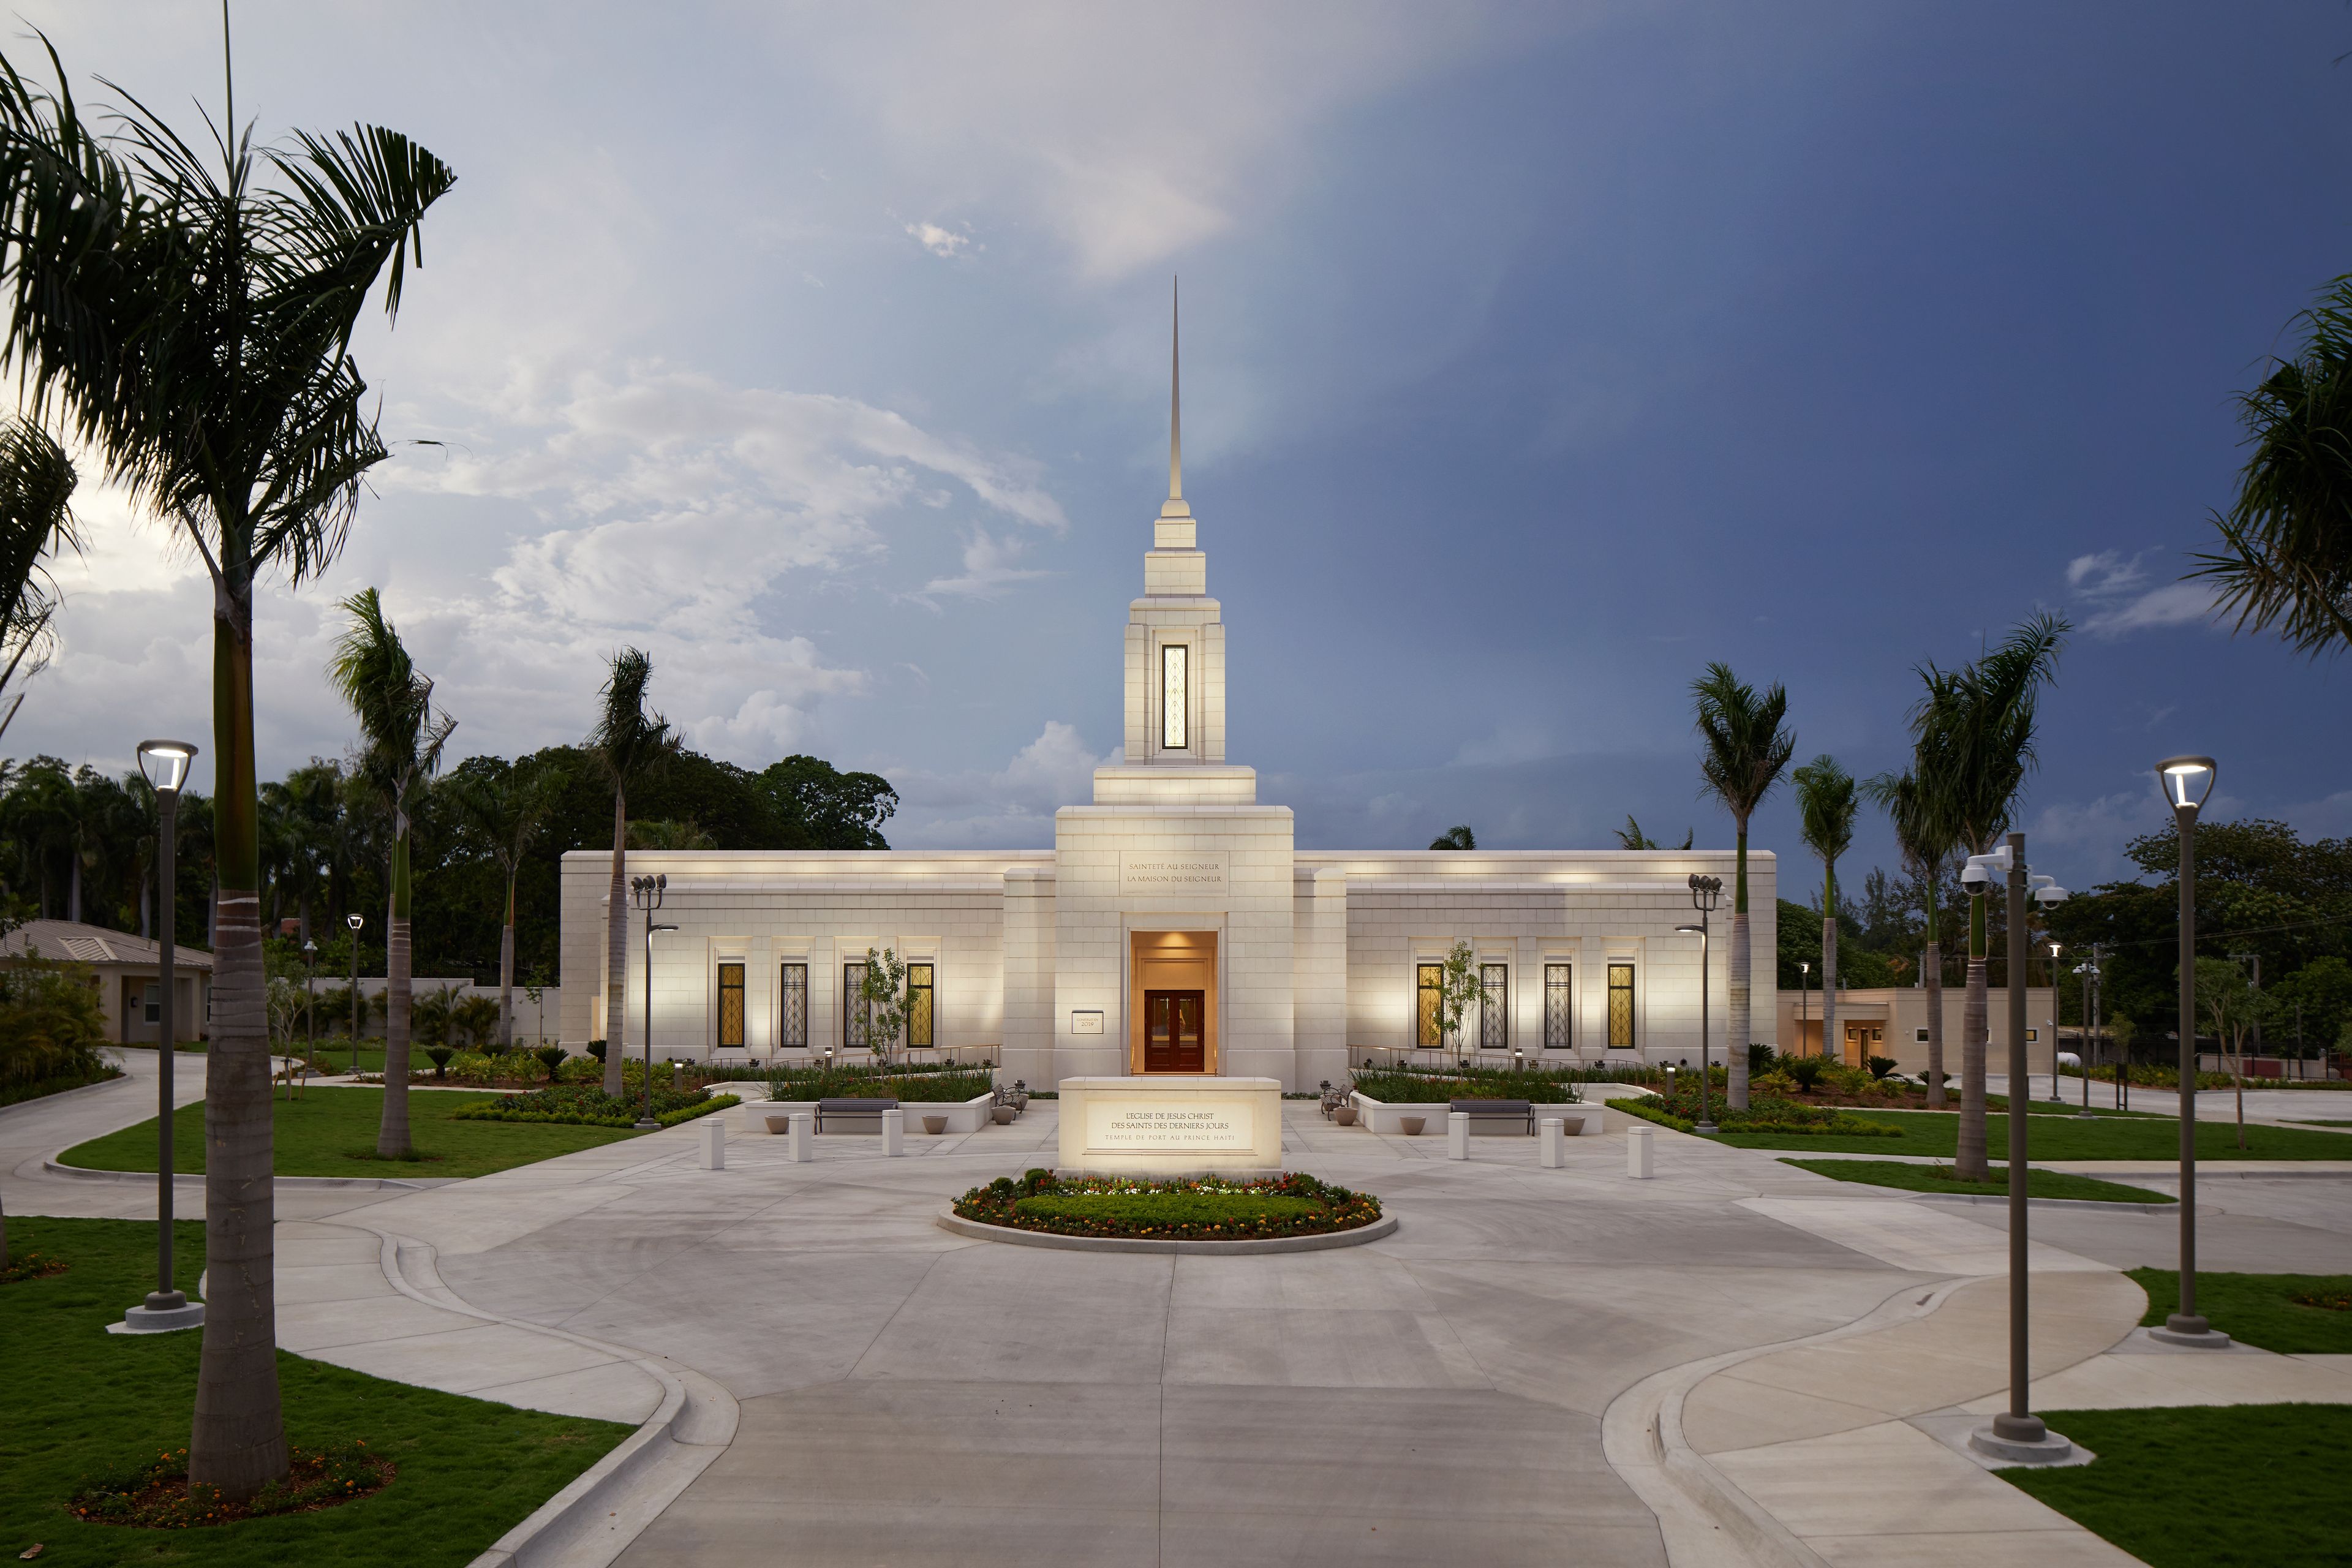 The front view of the Port-au-Prince Haiti Temple with the welcome sign.